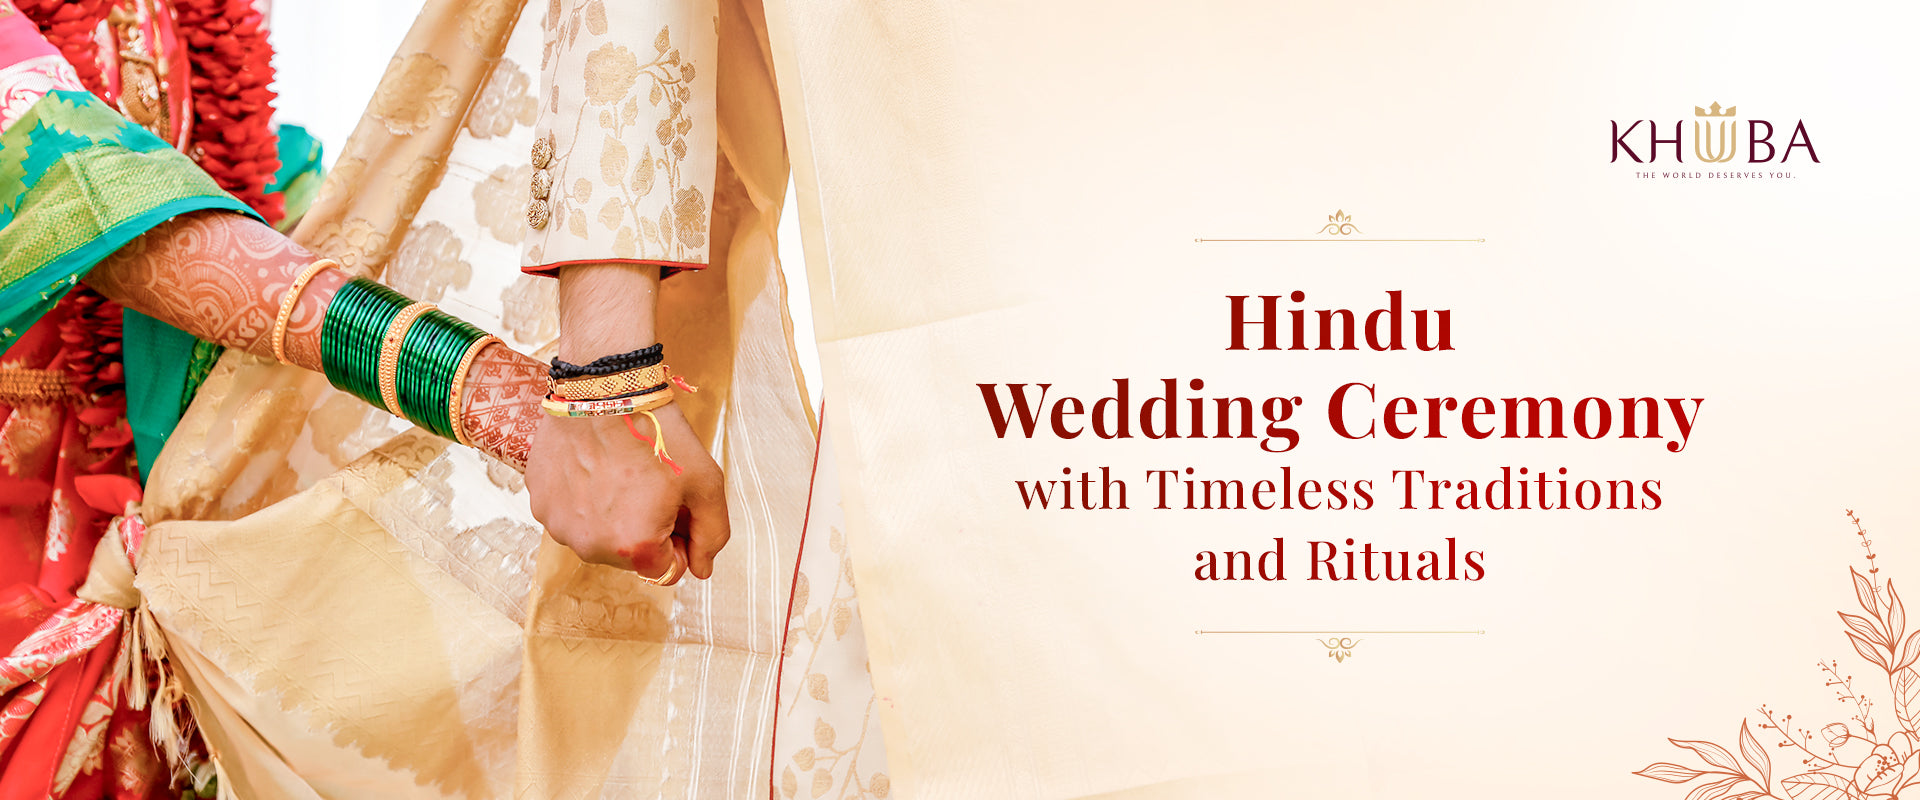 Hindu Wedding Ceremony with Timeless Traditions and Rituals